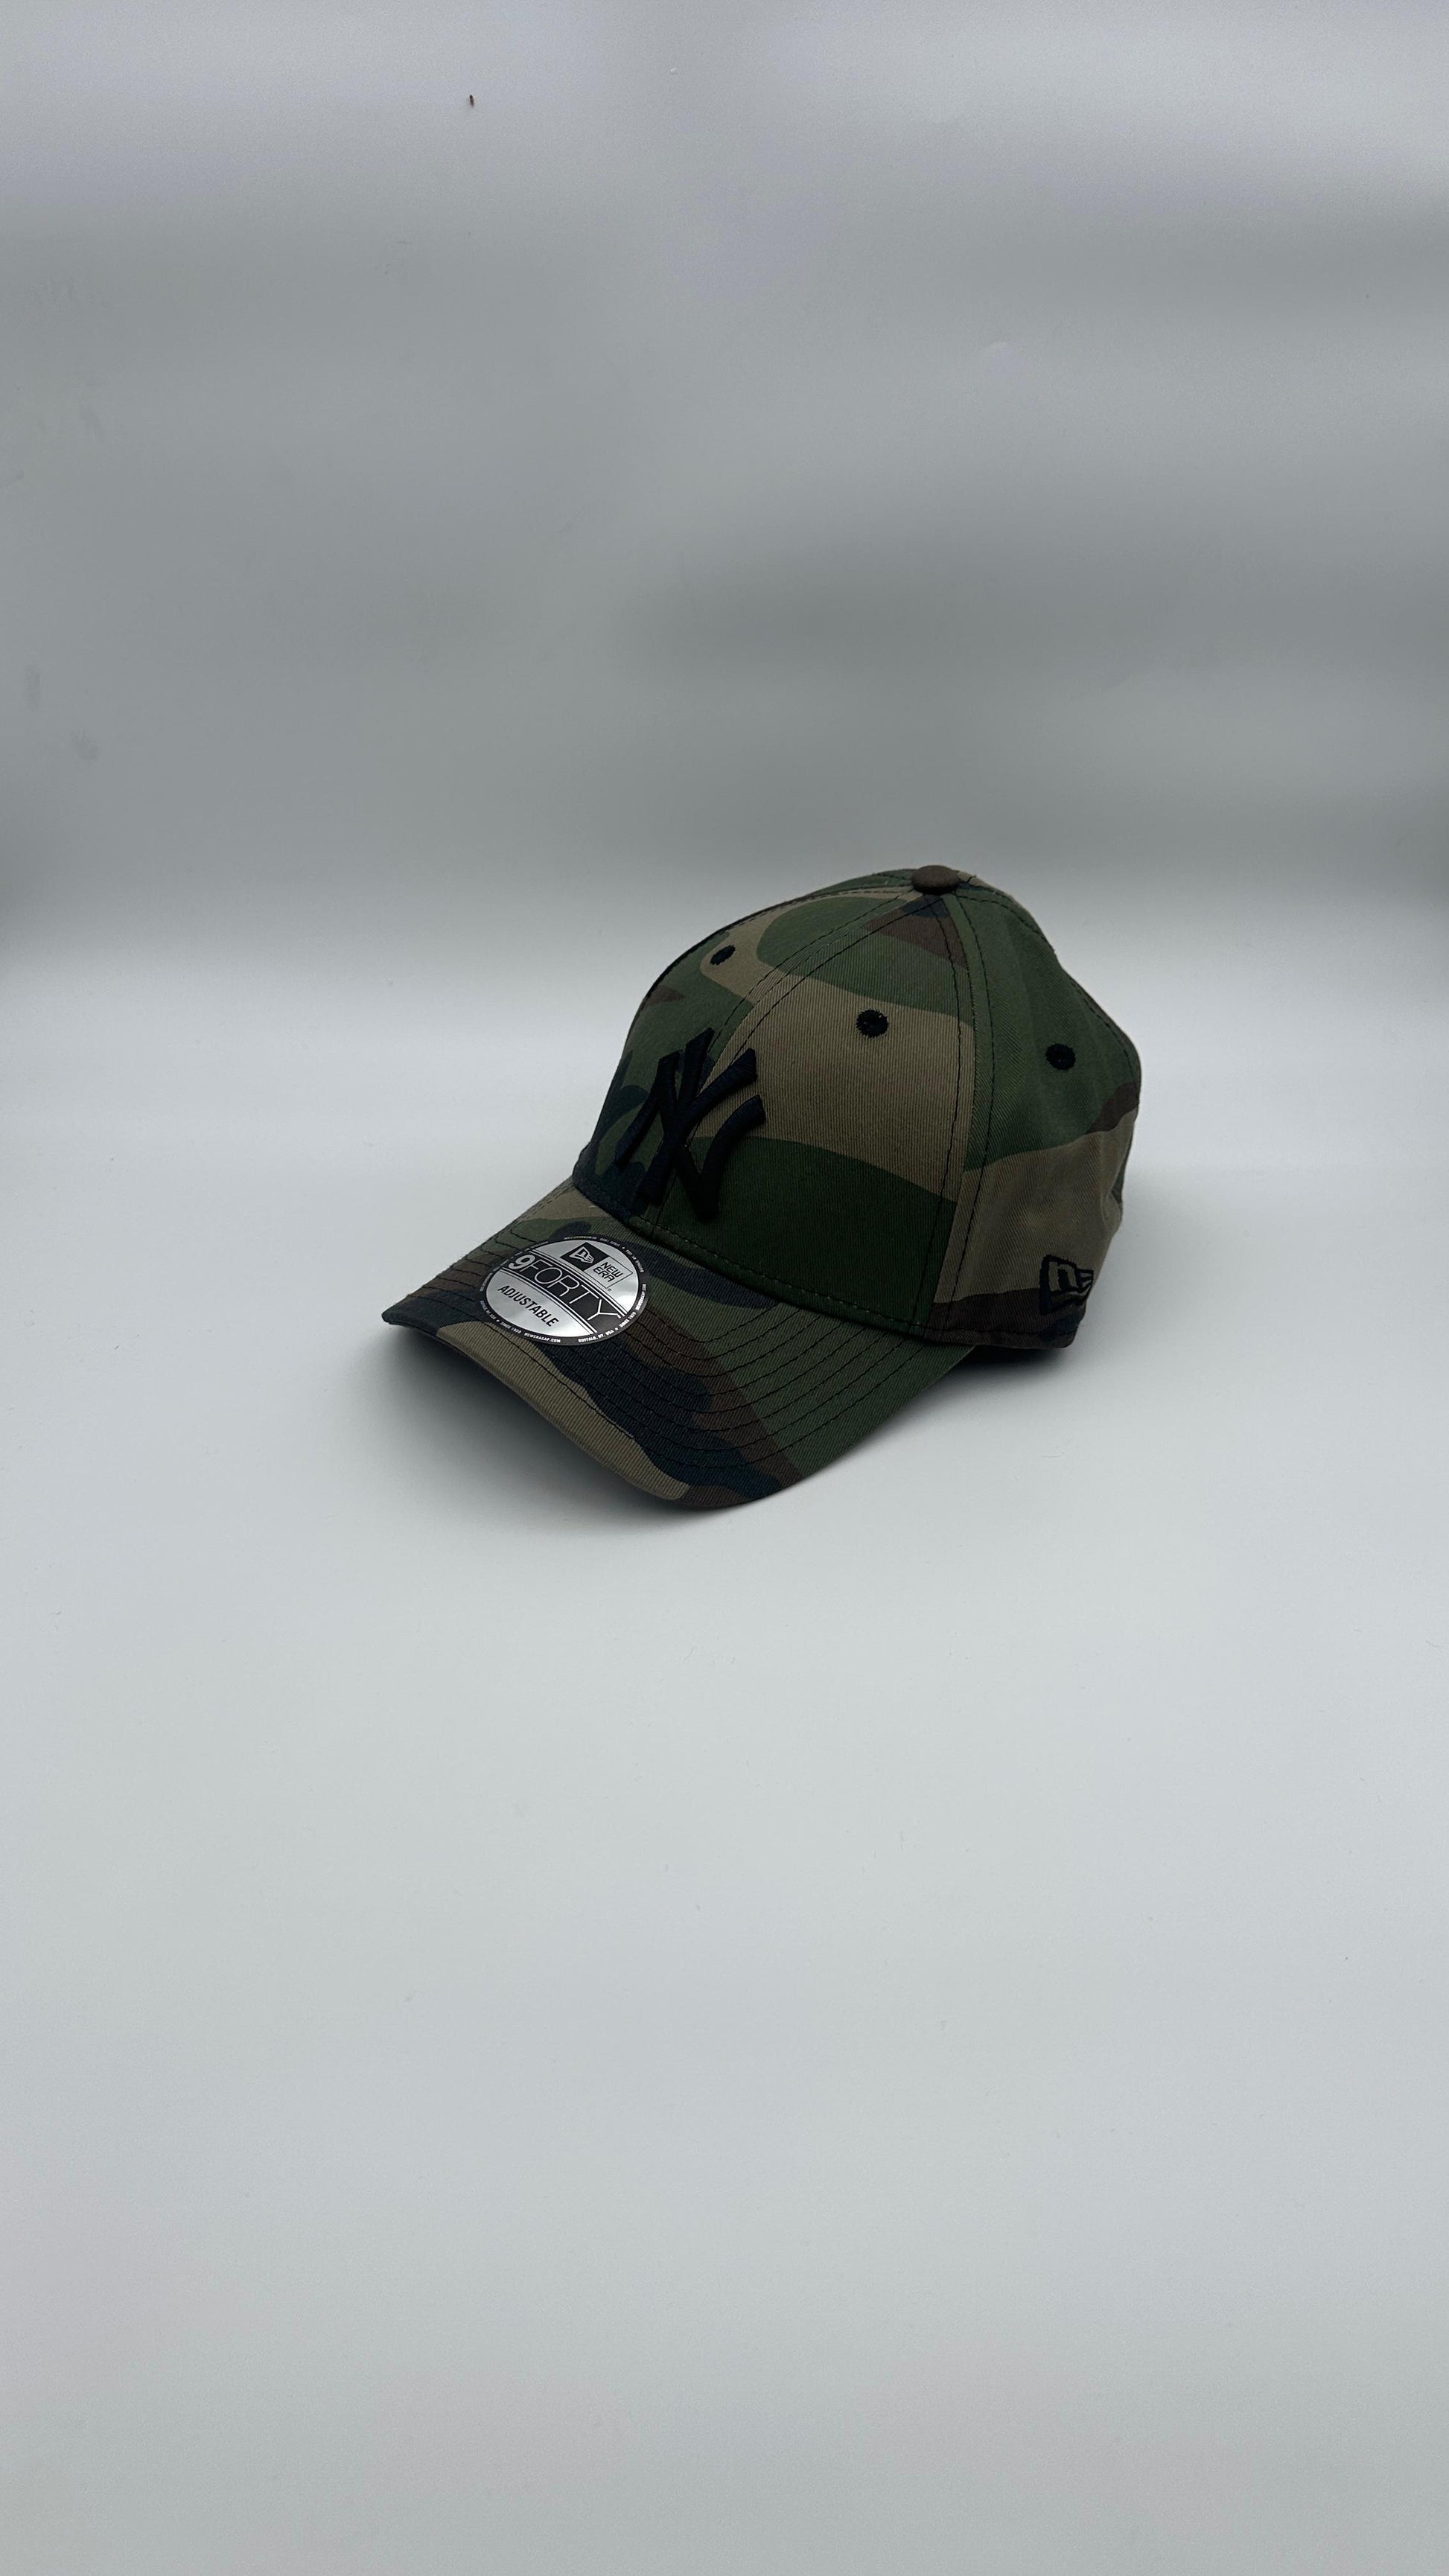 NEW YORK Cap “Army Black” - Butterfly Sneakers